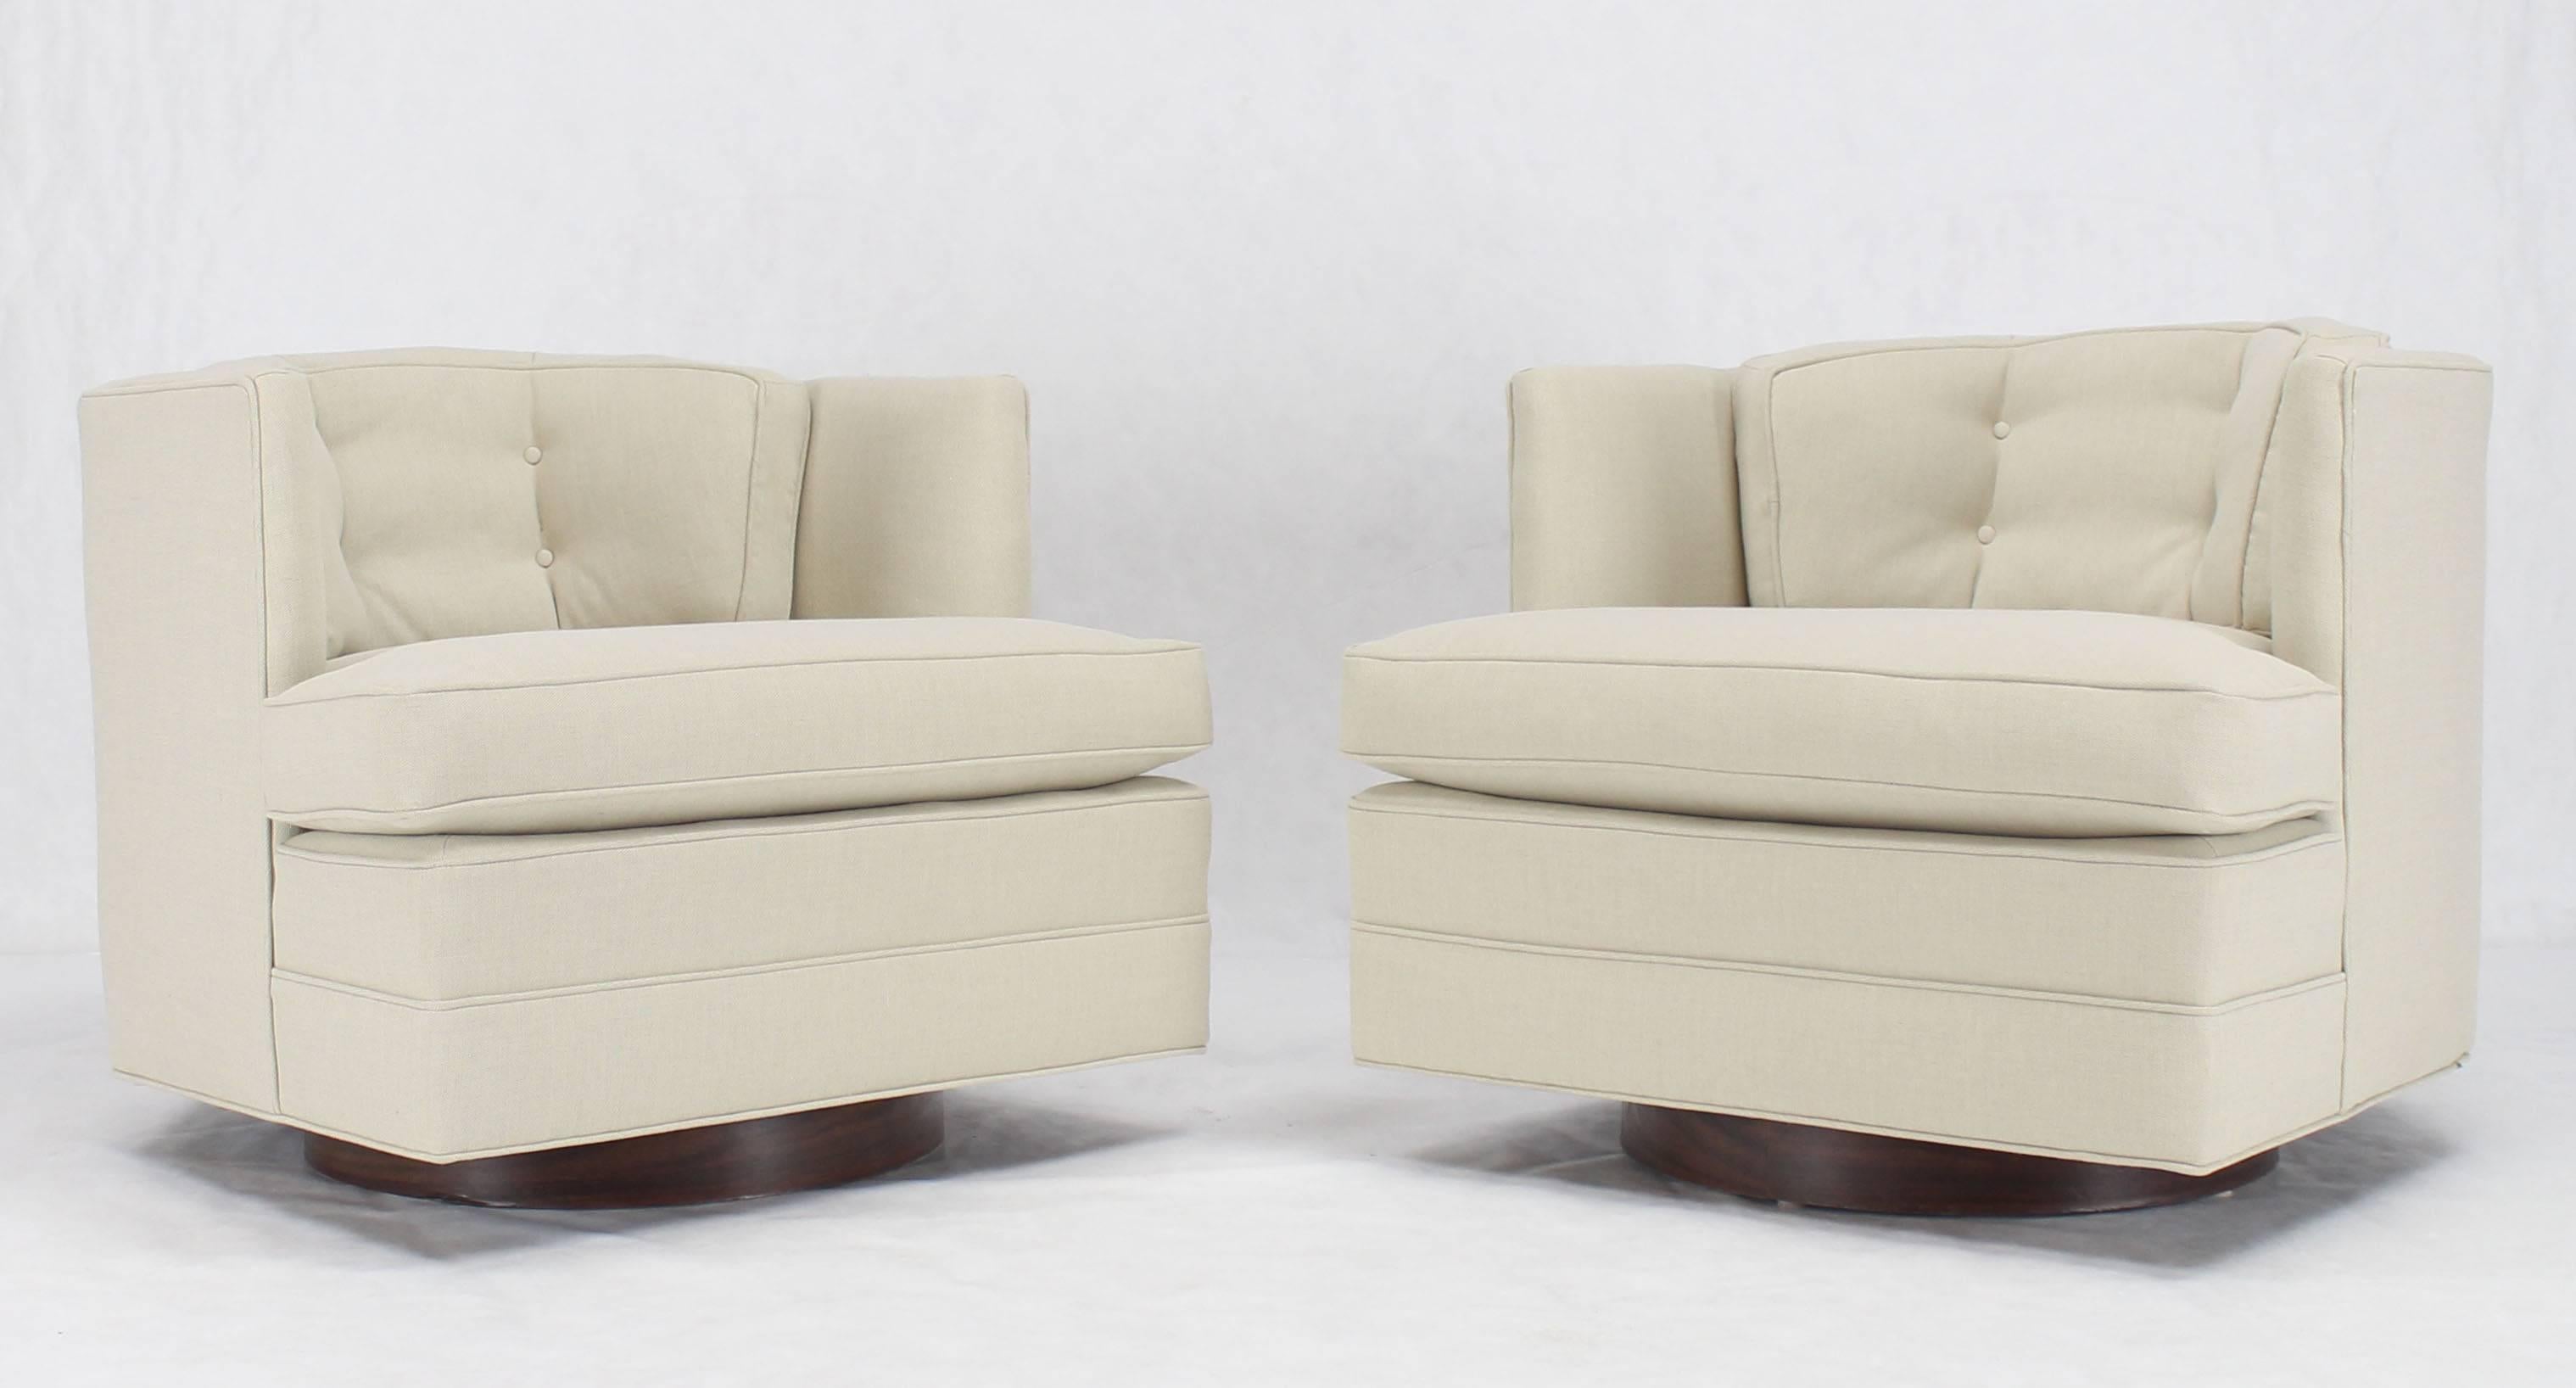 Pair of Mid-Century Modern swivel back lounge chairs with new upholstery.